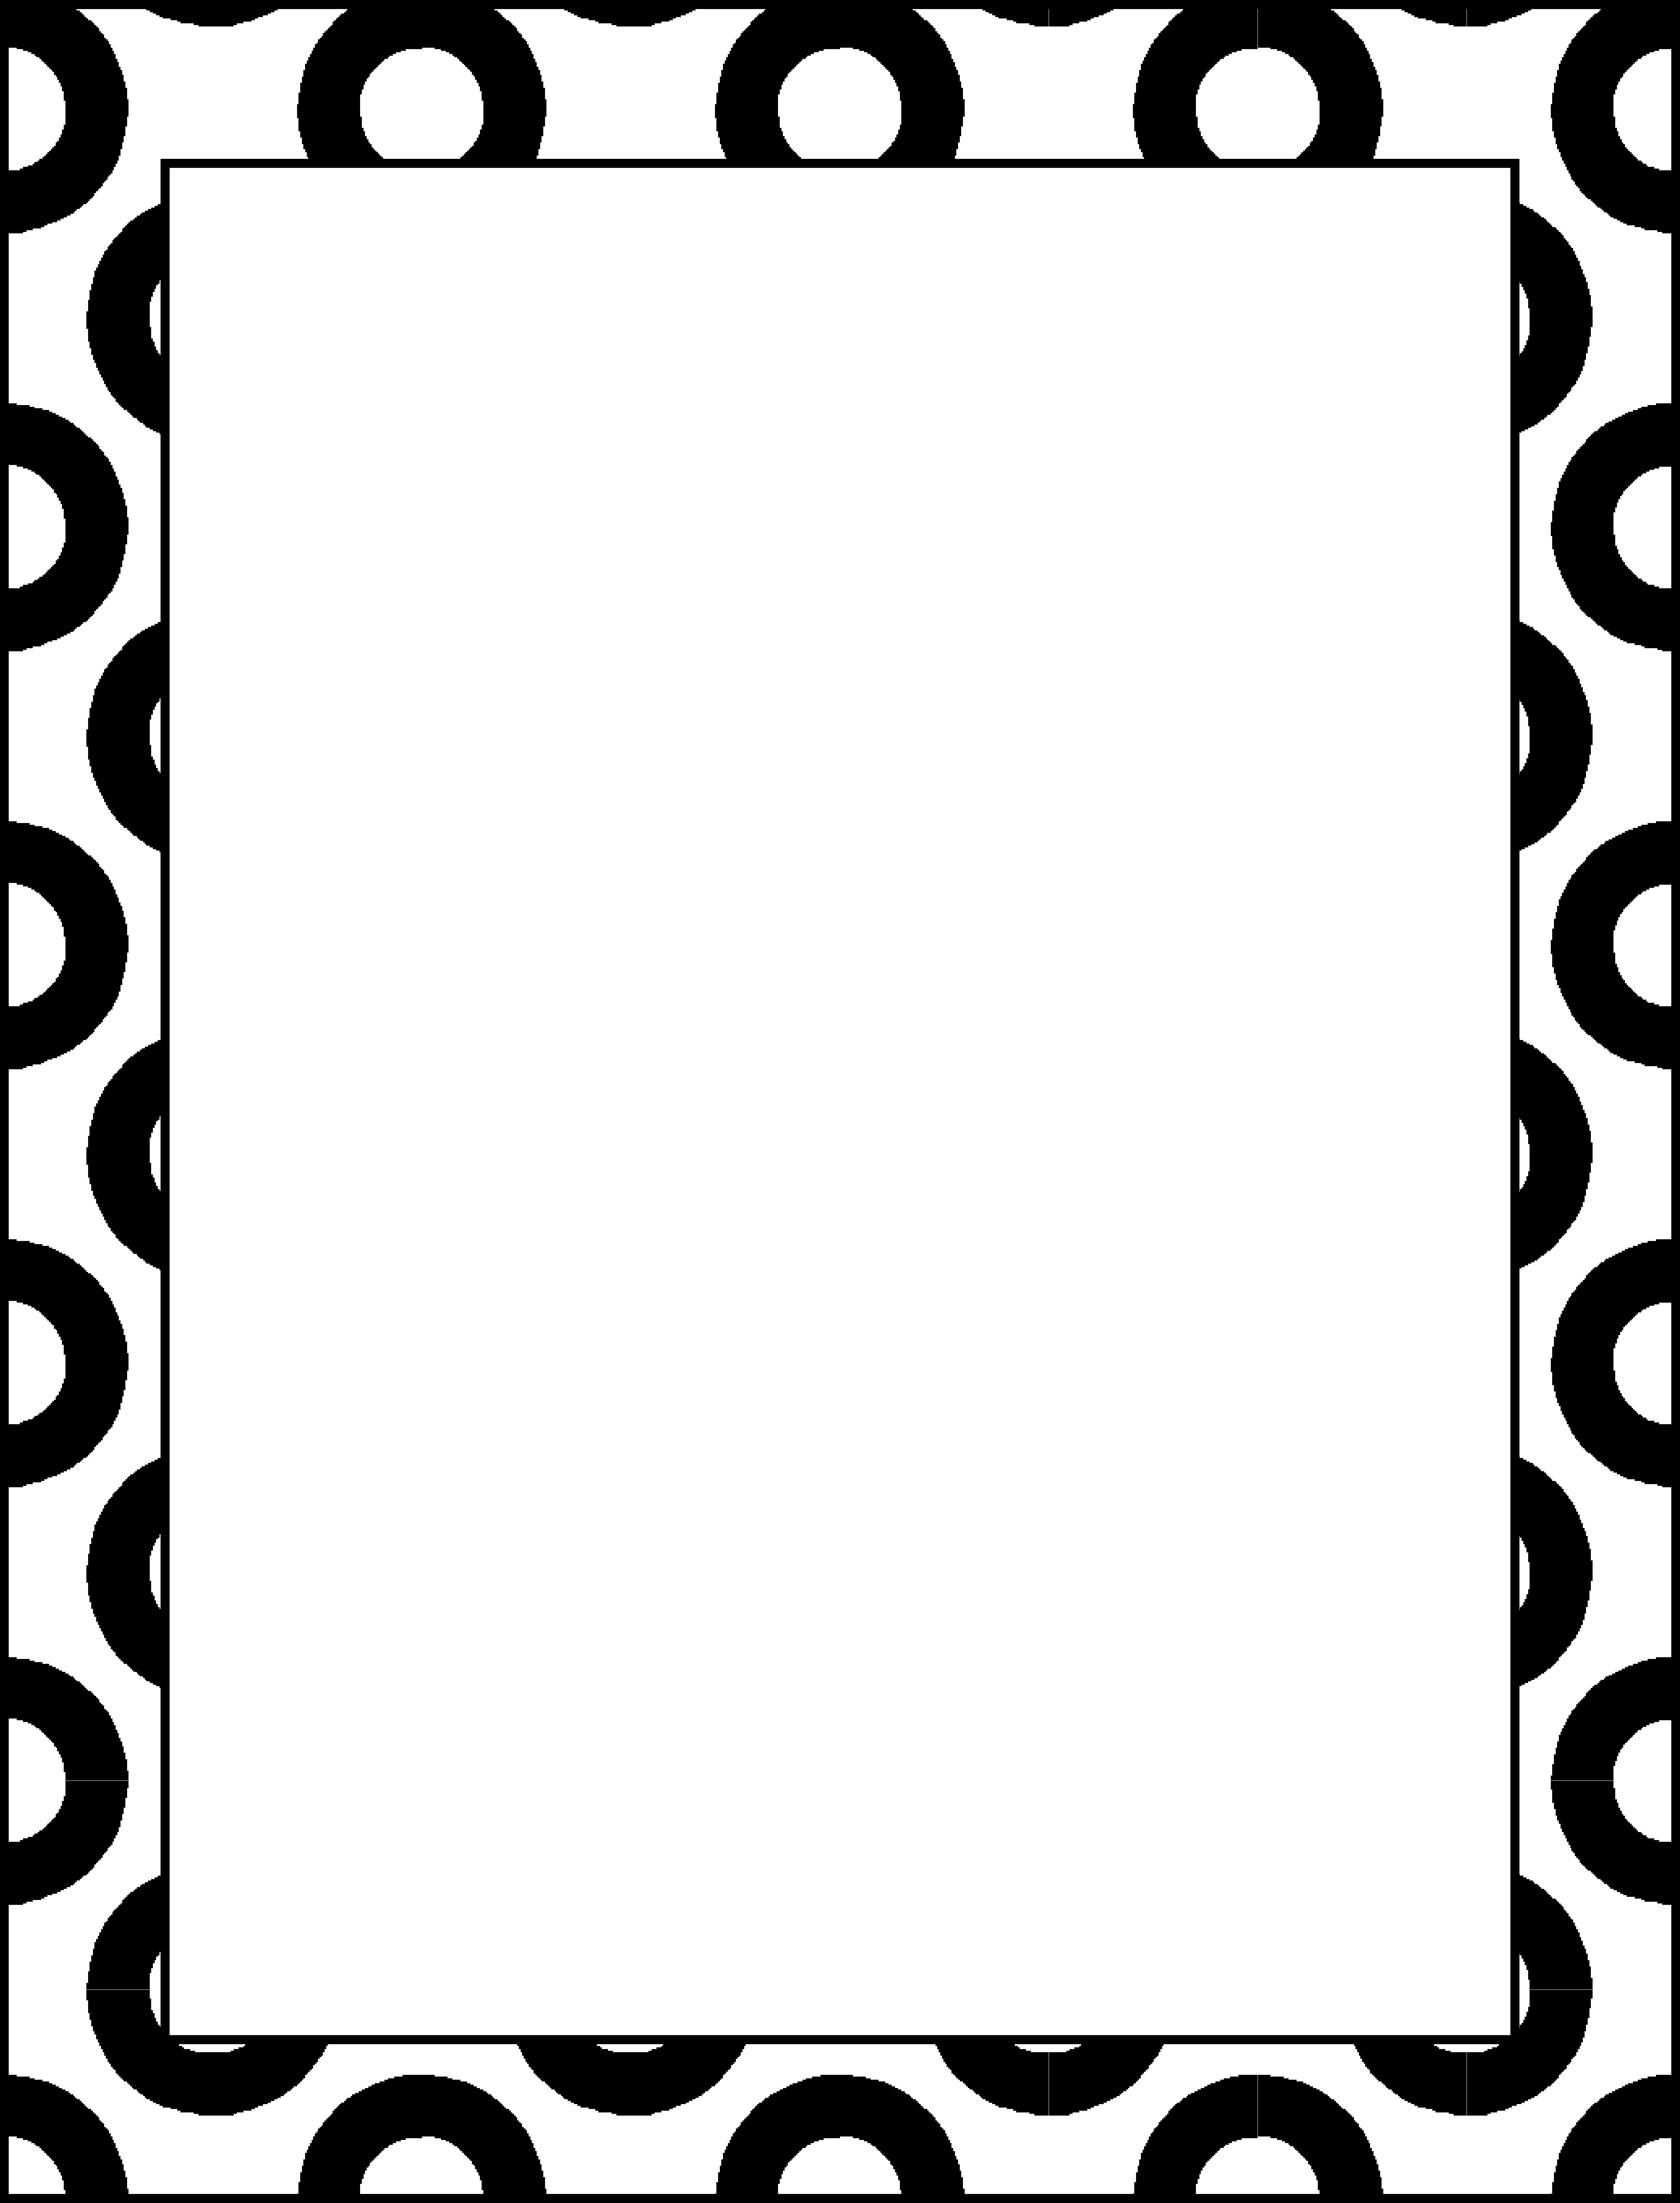 Invitation Borders Free Download - ClipArt Best